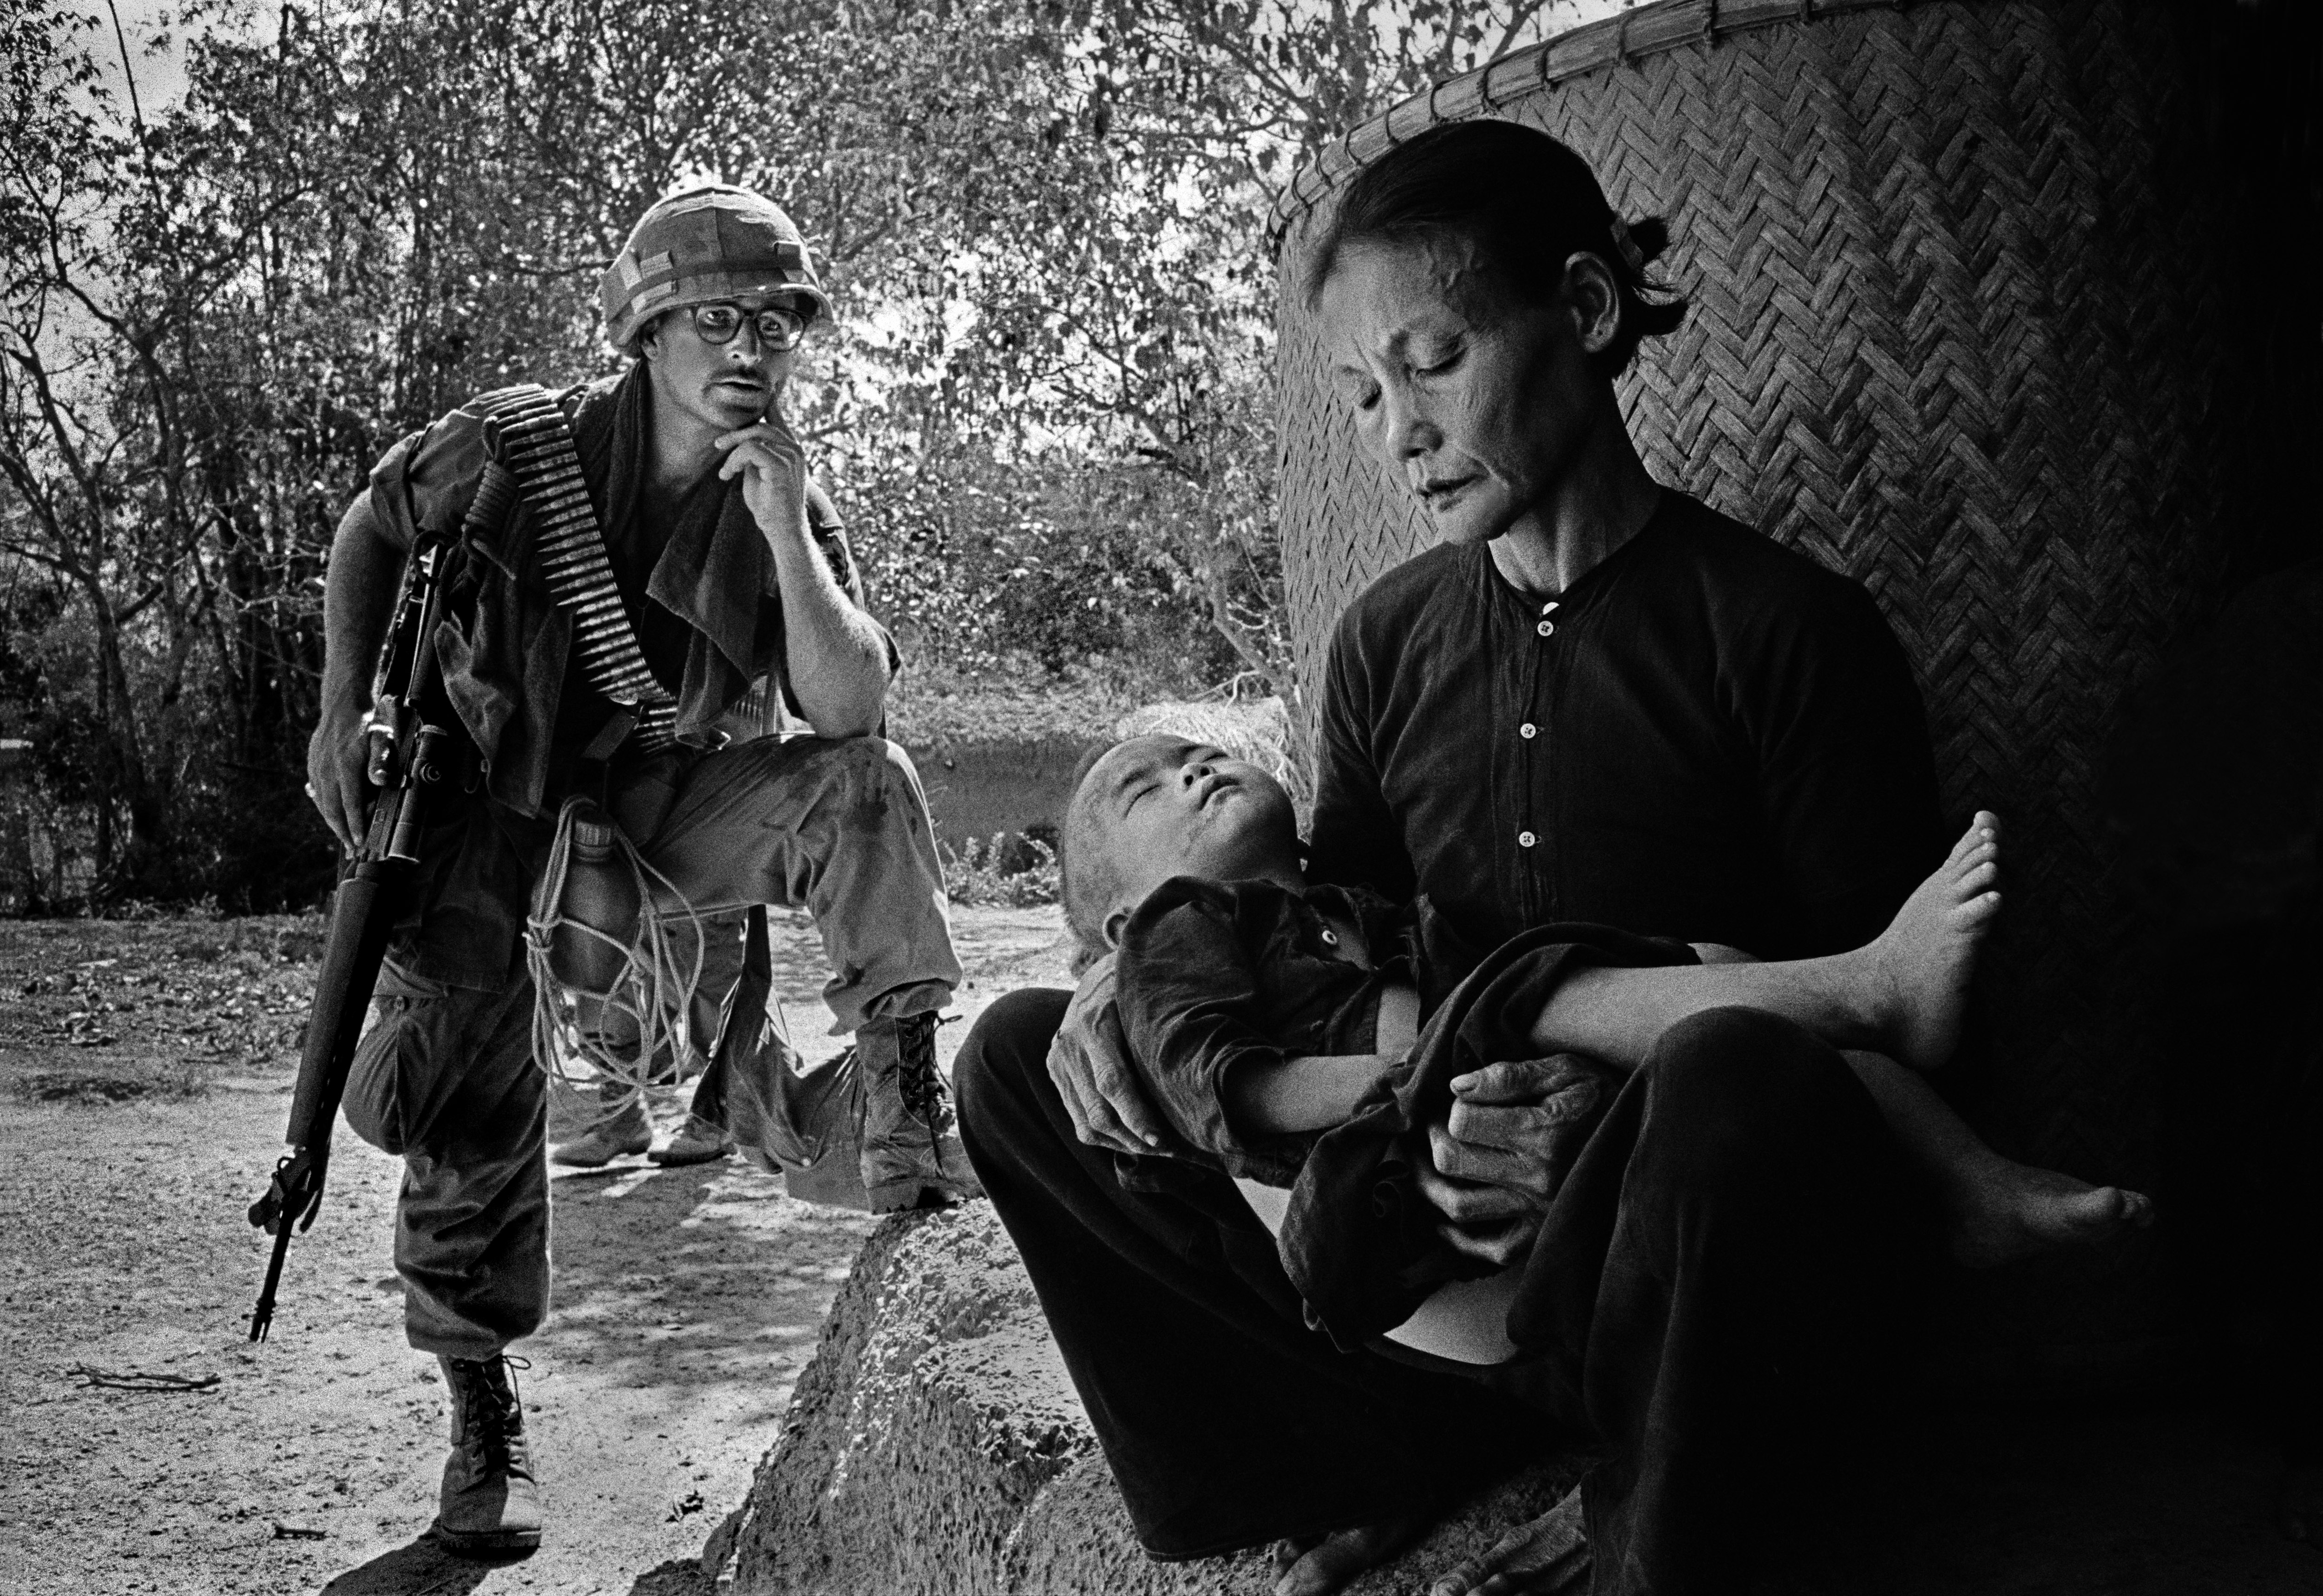 A U.S. serviceman watches a Vietnamese woman and child in a village in Quang Ngai province in 1967